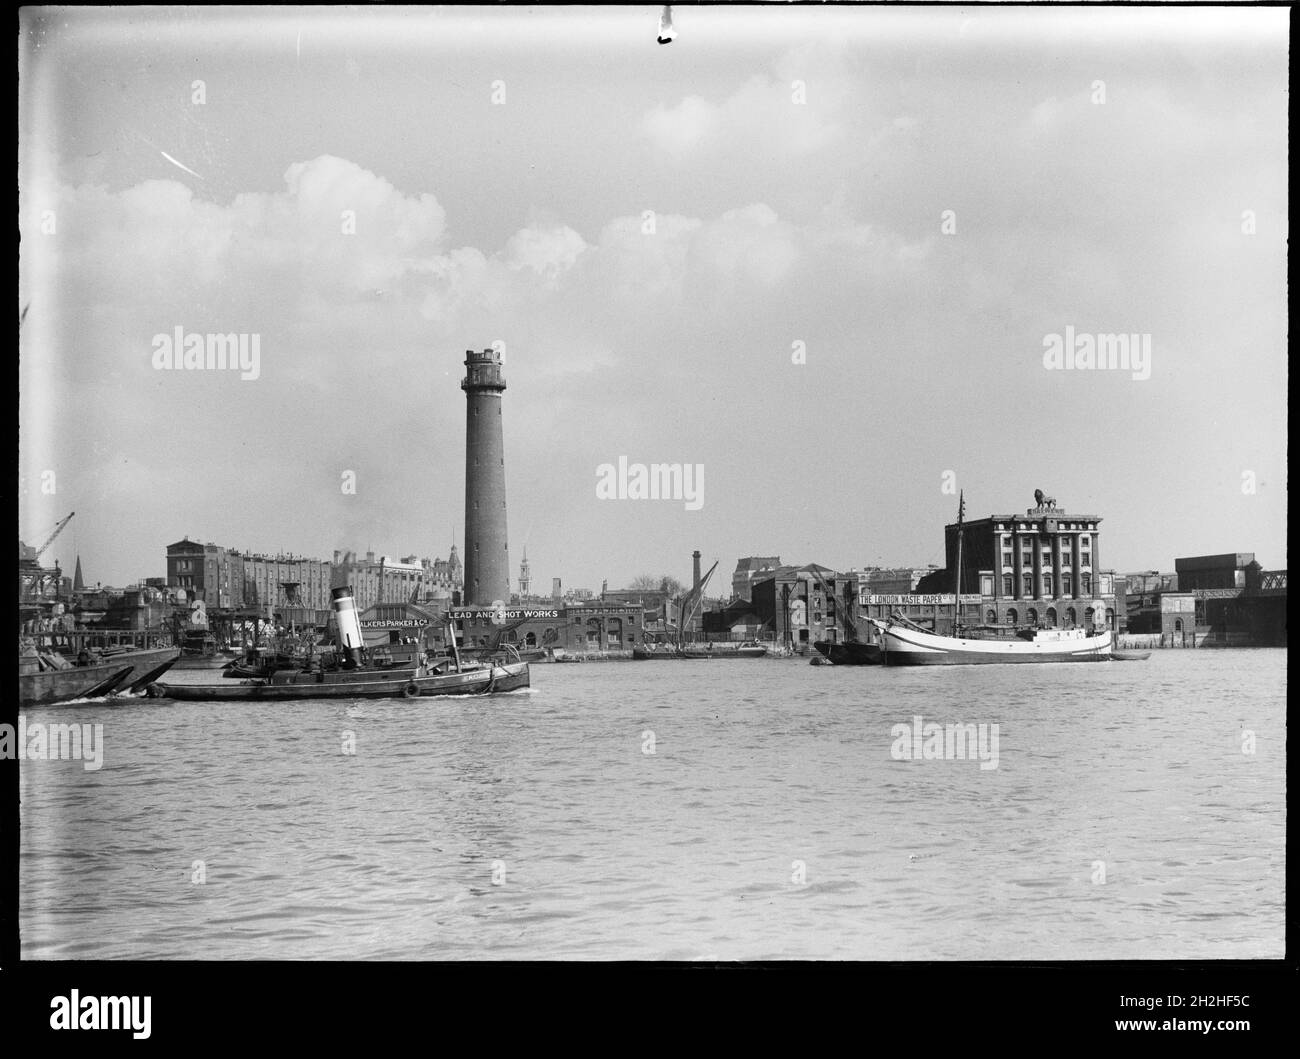 Shot Tower and Lead Works, Belvedere Road, Lambeth, Greater London Authority, 1936. A view across the River Thames towards the shot tower at Lambeth Lead Works with the Lion Brewery on the right. The shot tower of the Lambeth Lead Works was designed by David Ridall Roper and was built in 1826 for Thomas Maltby &amp; Co. At the time of this photograph it was operated by Walkers, Parker &amp; Co but it was later demolished in 1962 to make way for the Queen Elizabeth Hall. The Lion Brewery was built in 1836-37 but was later demolished in 1949 to make way for the Royal Festival Hall. Stock Photo